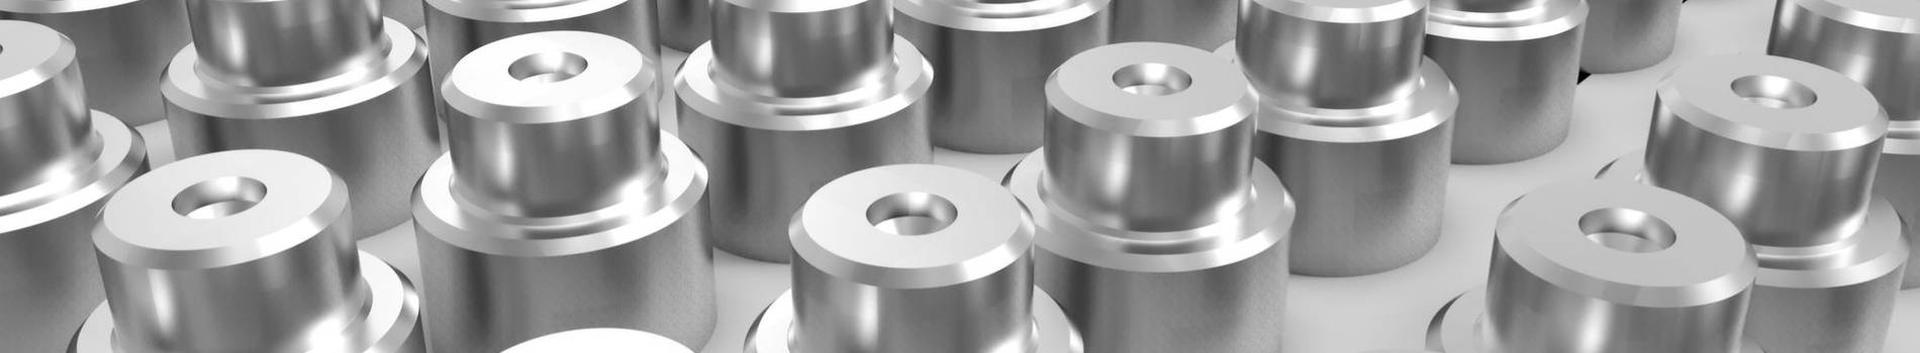 aluminum products, construction and finishing materials, construction parts and accessories, metal products